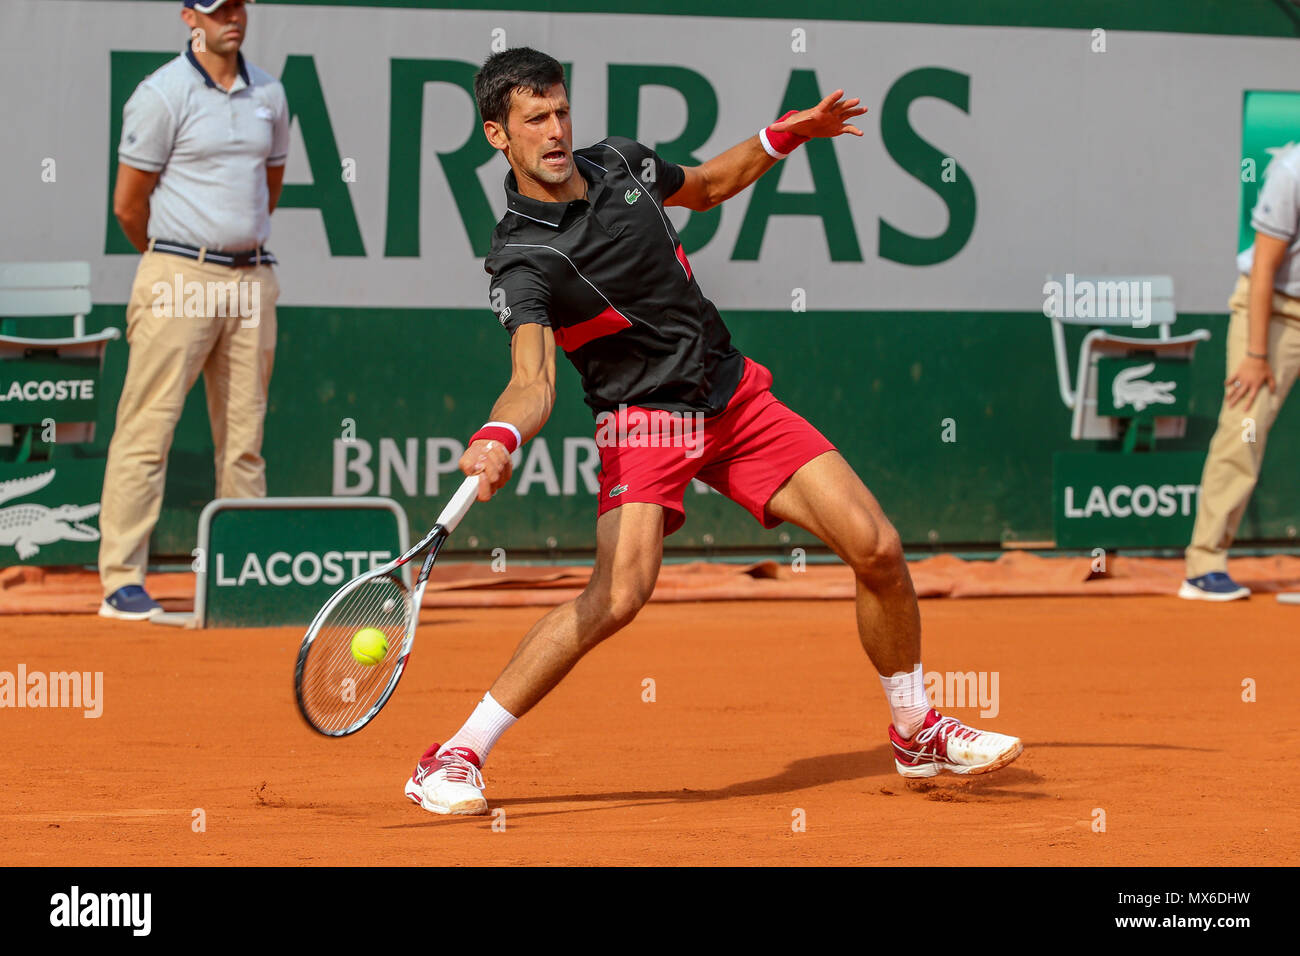 PARIS, IF - 03.06.2018: ROLAND GARROS 2018 - Novak Djokovic (SRB) in a  match valid for the 2018 Roland Garros tournament held in Paris, IF.  (Photo: Andre Chaco/Fotoarena Stock Photo - Alamy